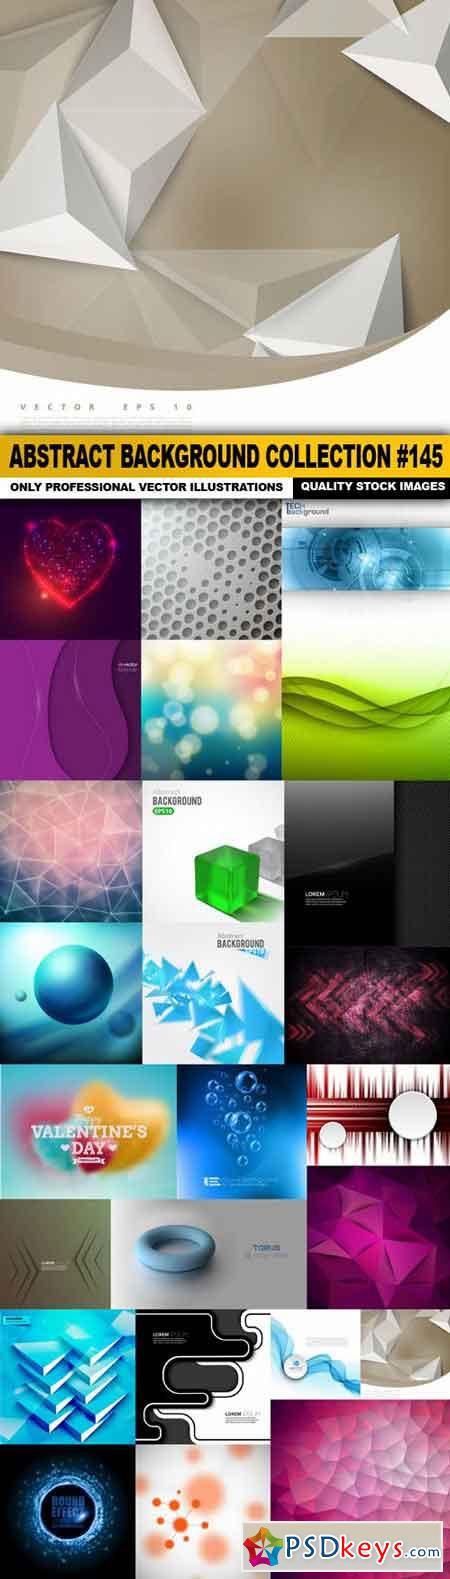 Abstract Background Collection #145 - 25 Vector